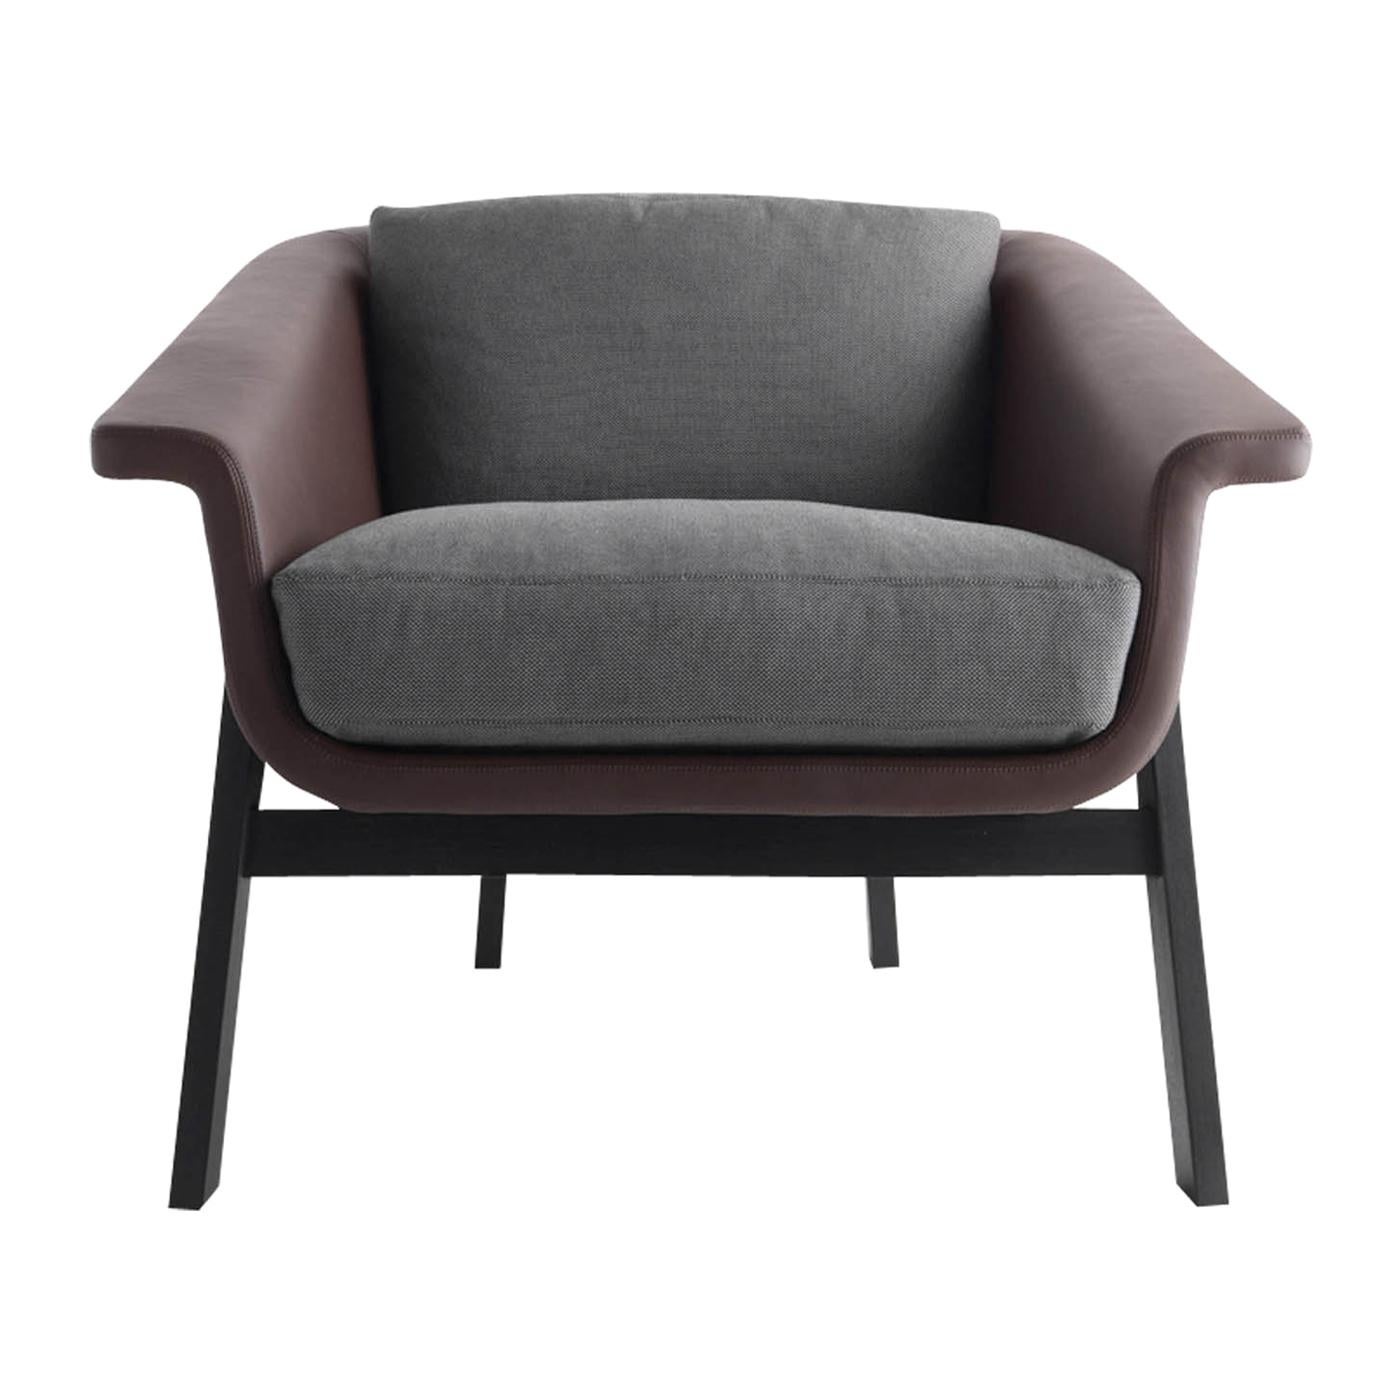 Sienna Gray Armchair by Studio Balutto For Sale